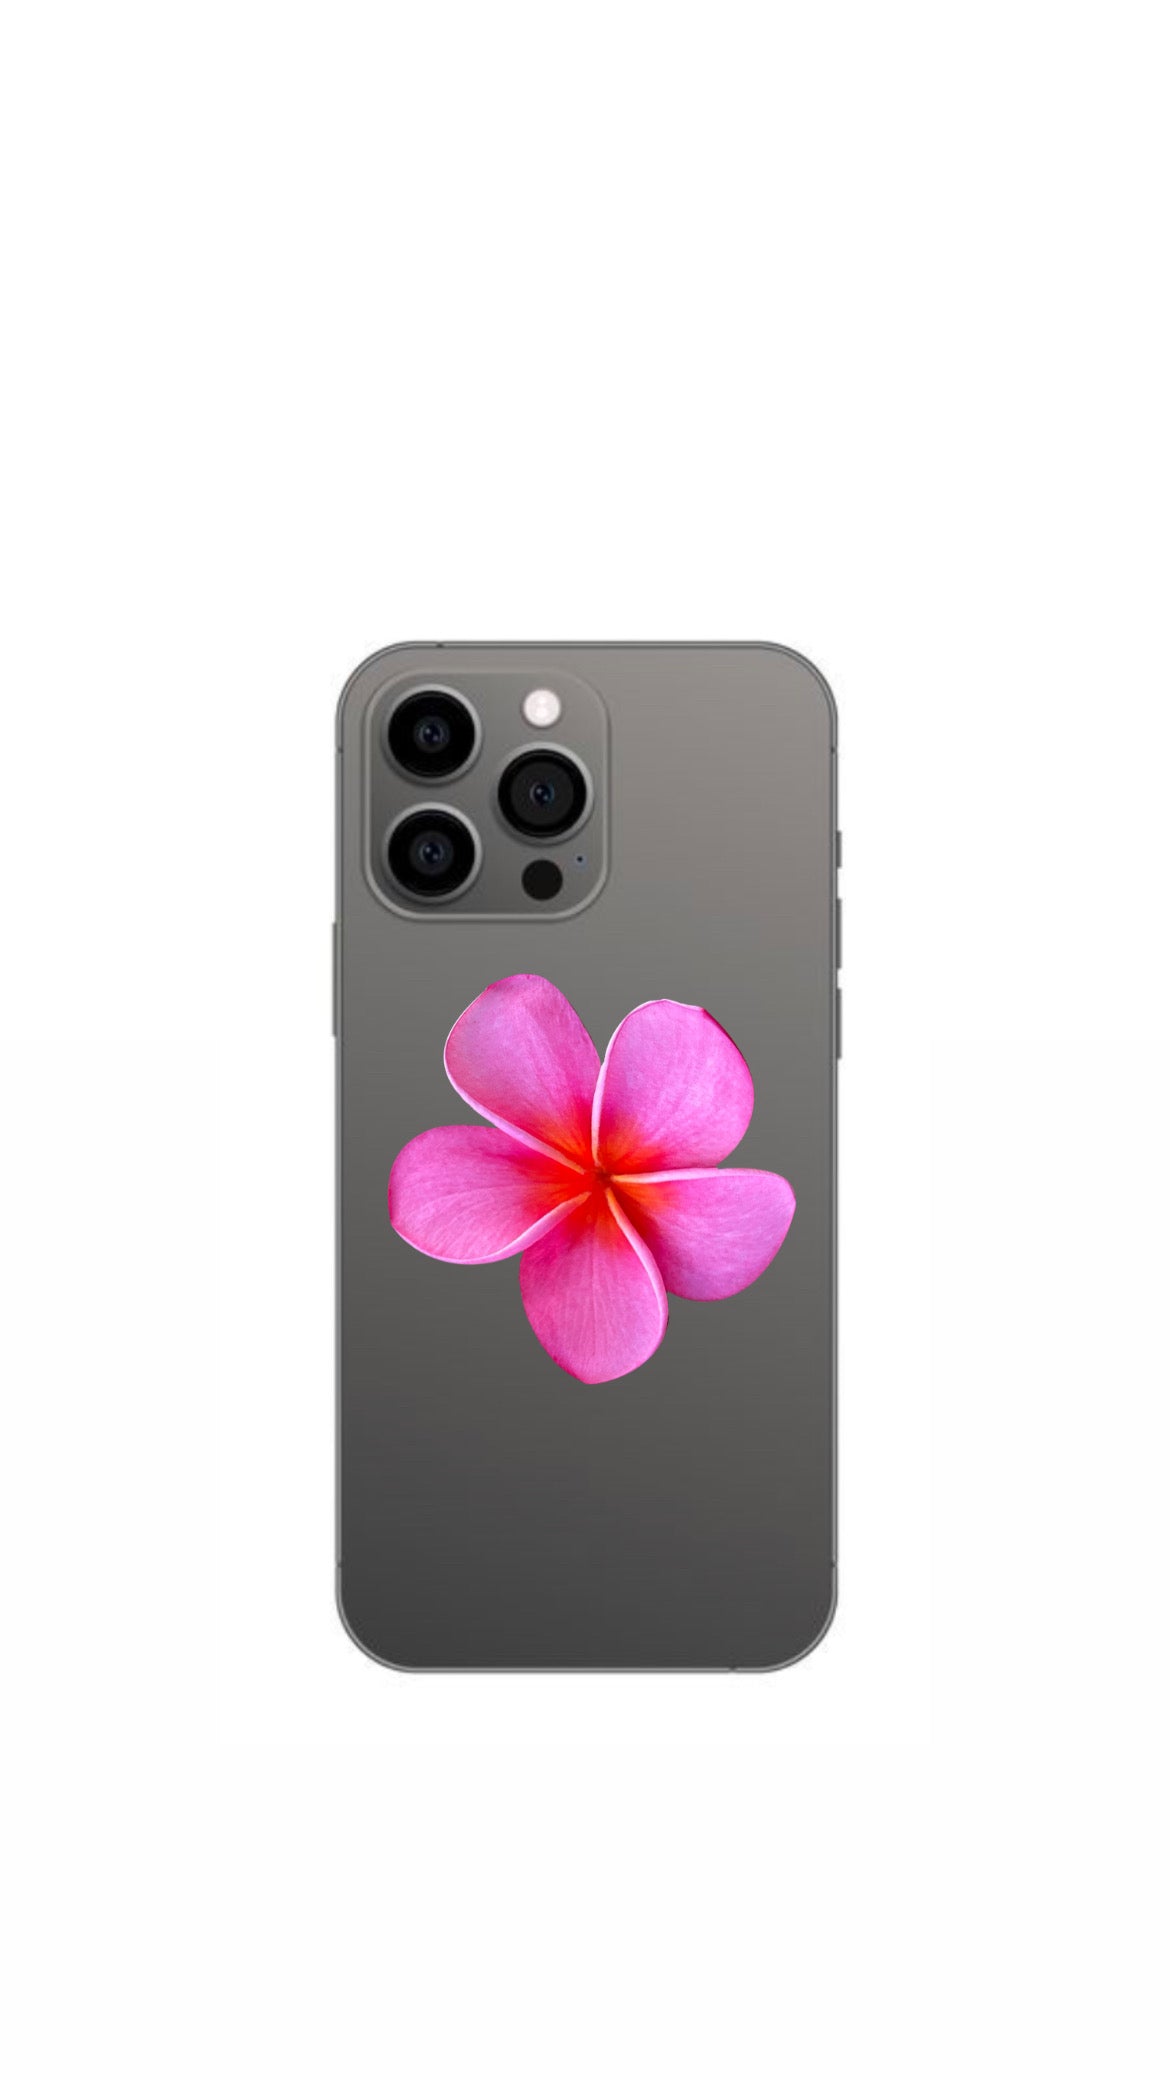 PLUMERIA PHONE GRIP OR BADGE HOLDER (COMES IN THREE COLORS)